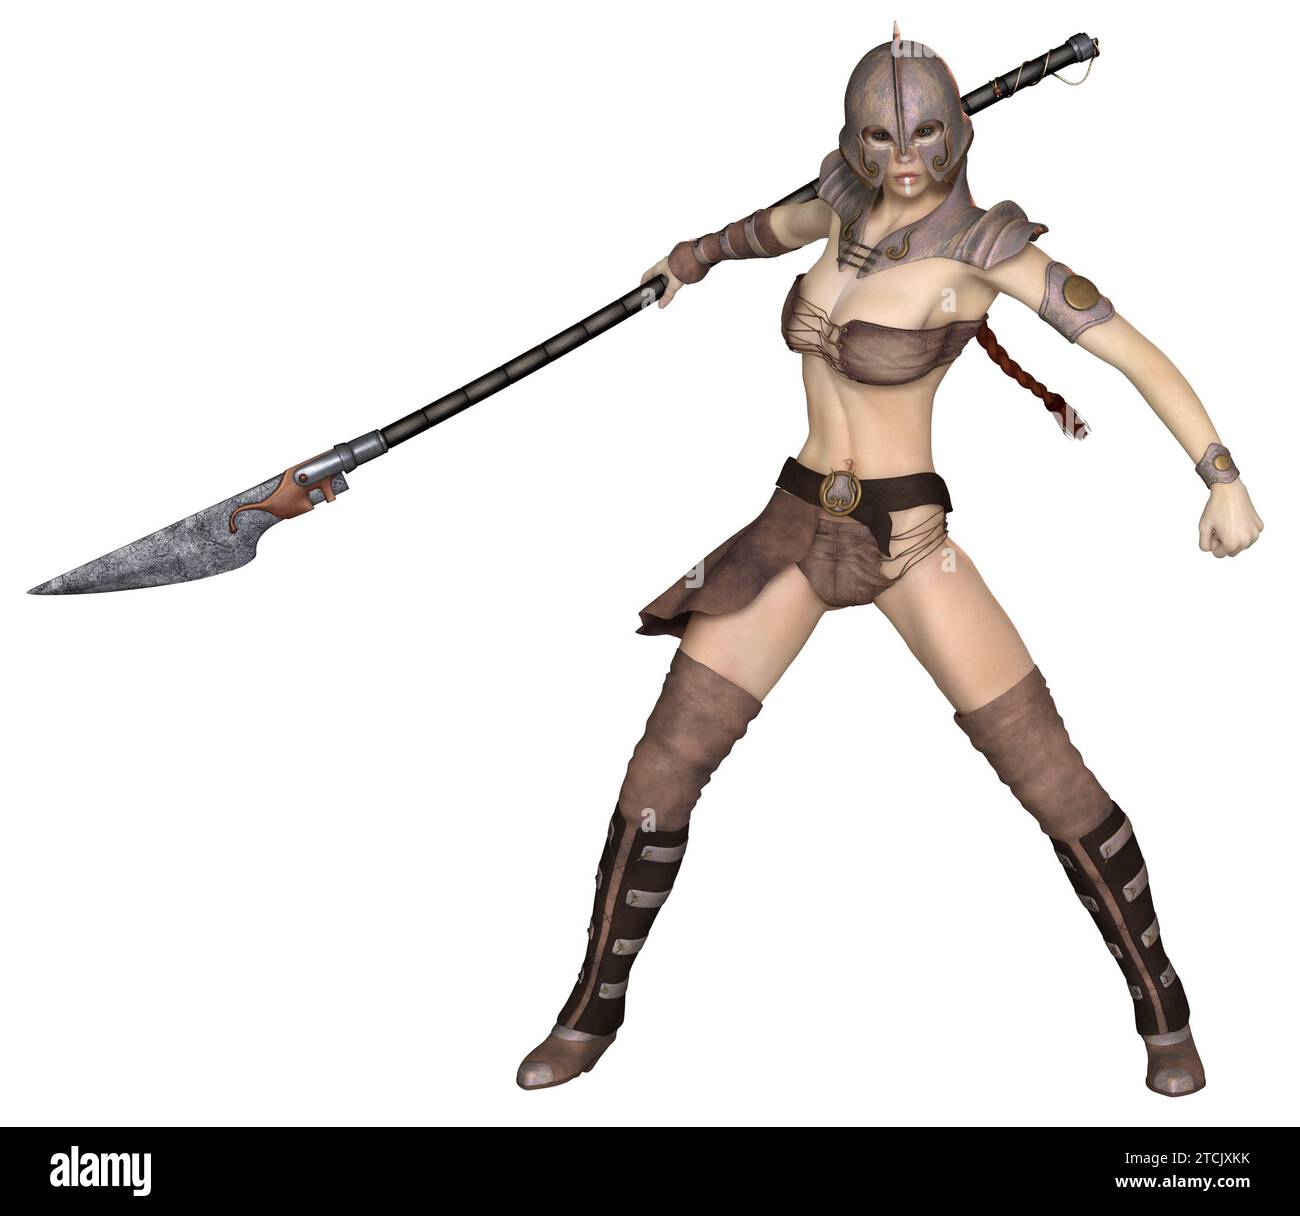 Female Fantasy Barbarian Hunter Attacking with Spear Stock Photo